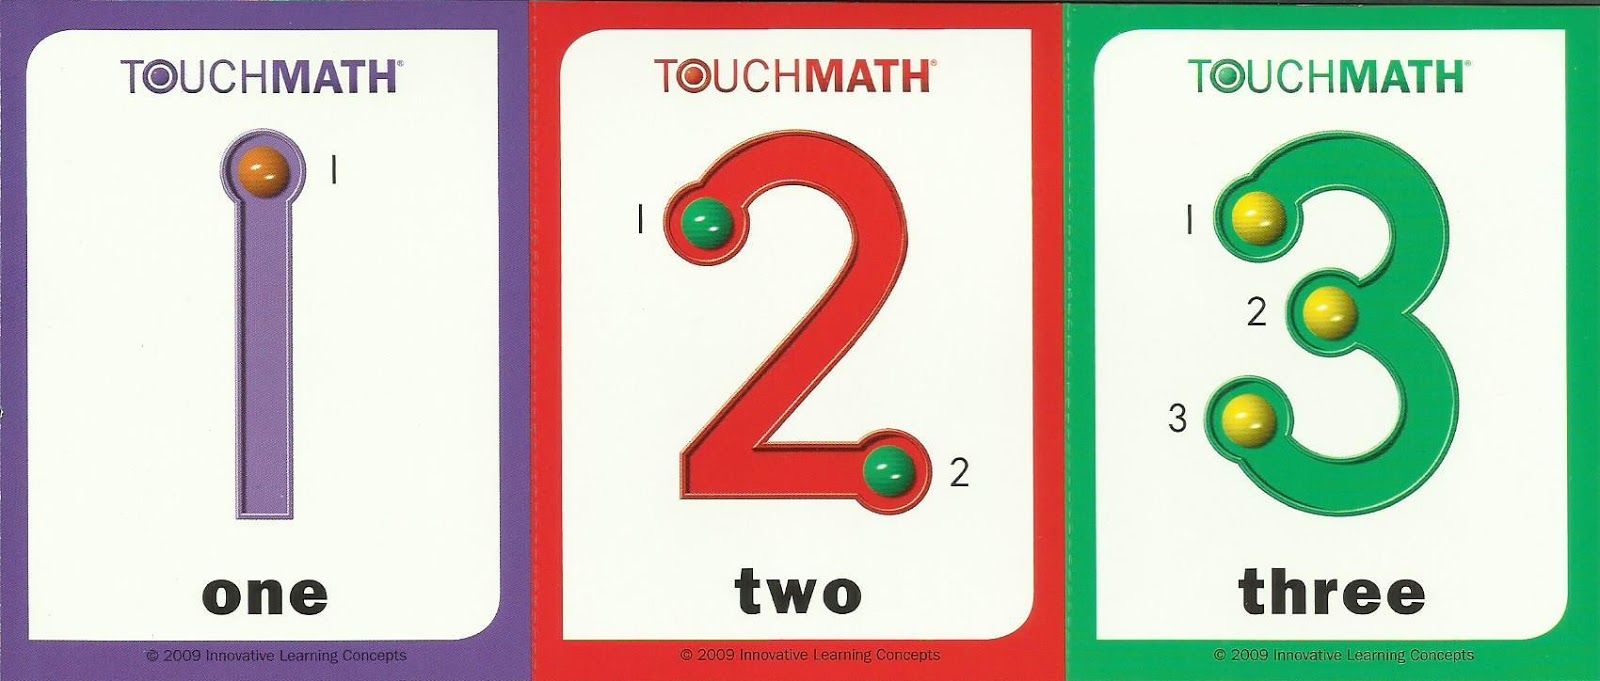 Every Bed of Roses A Touch Math Adventure {TouchMath Review}